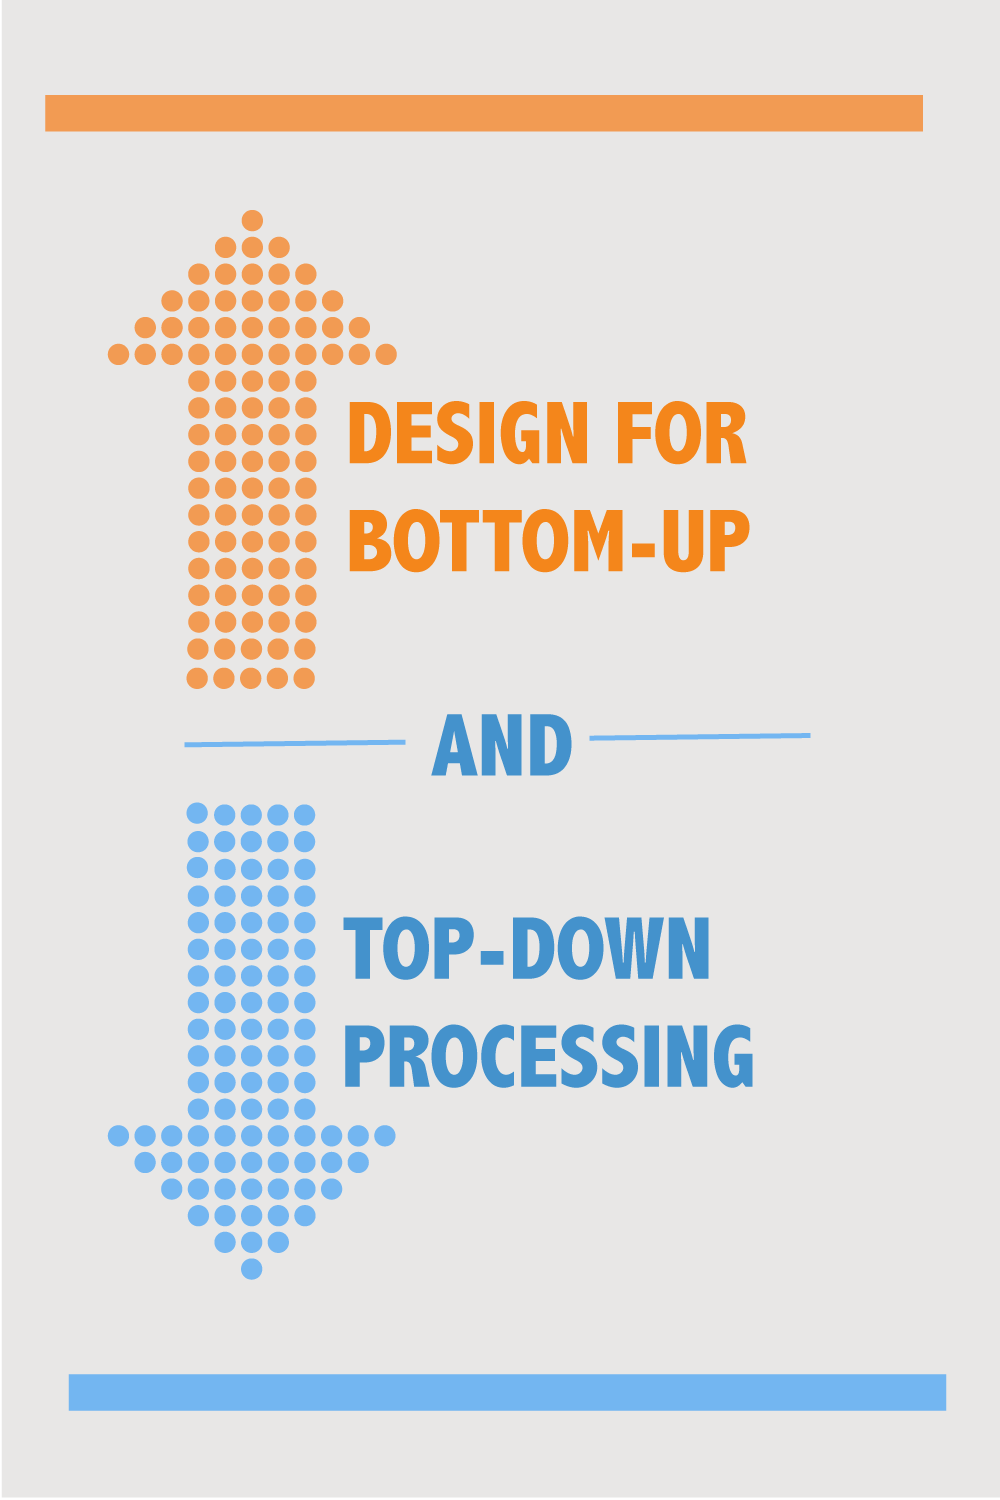 Design for Bottom-Up and Top-Down Processing